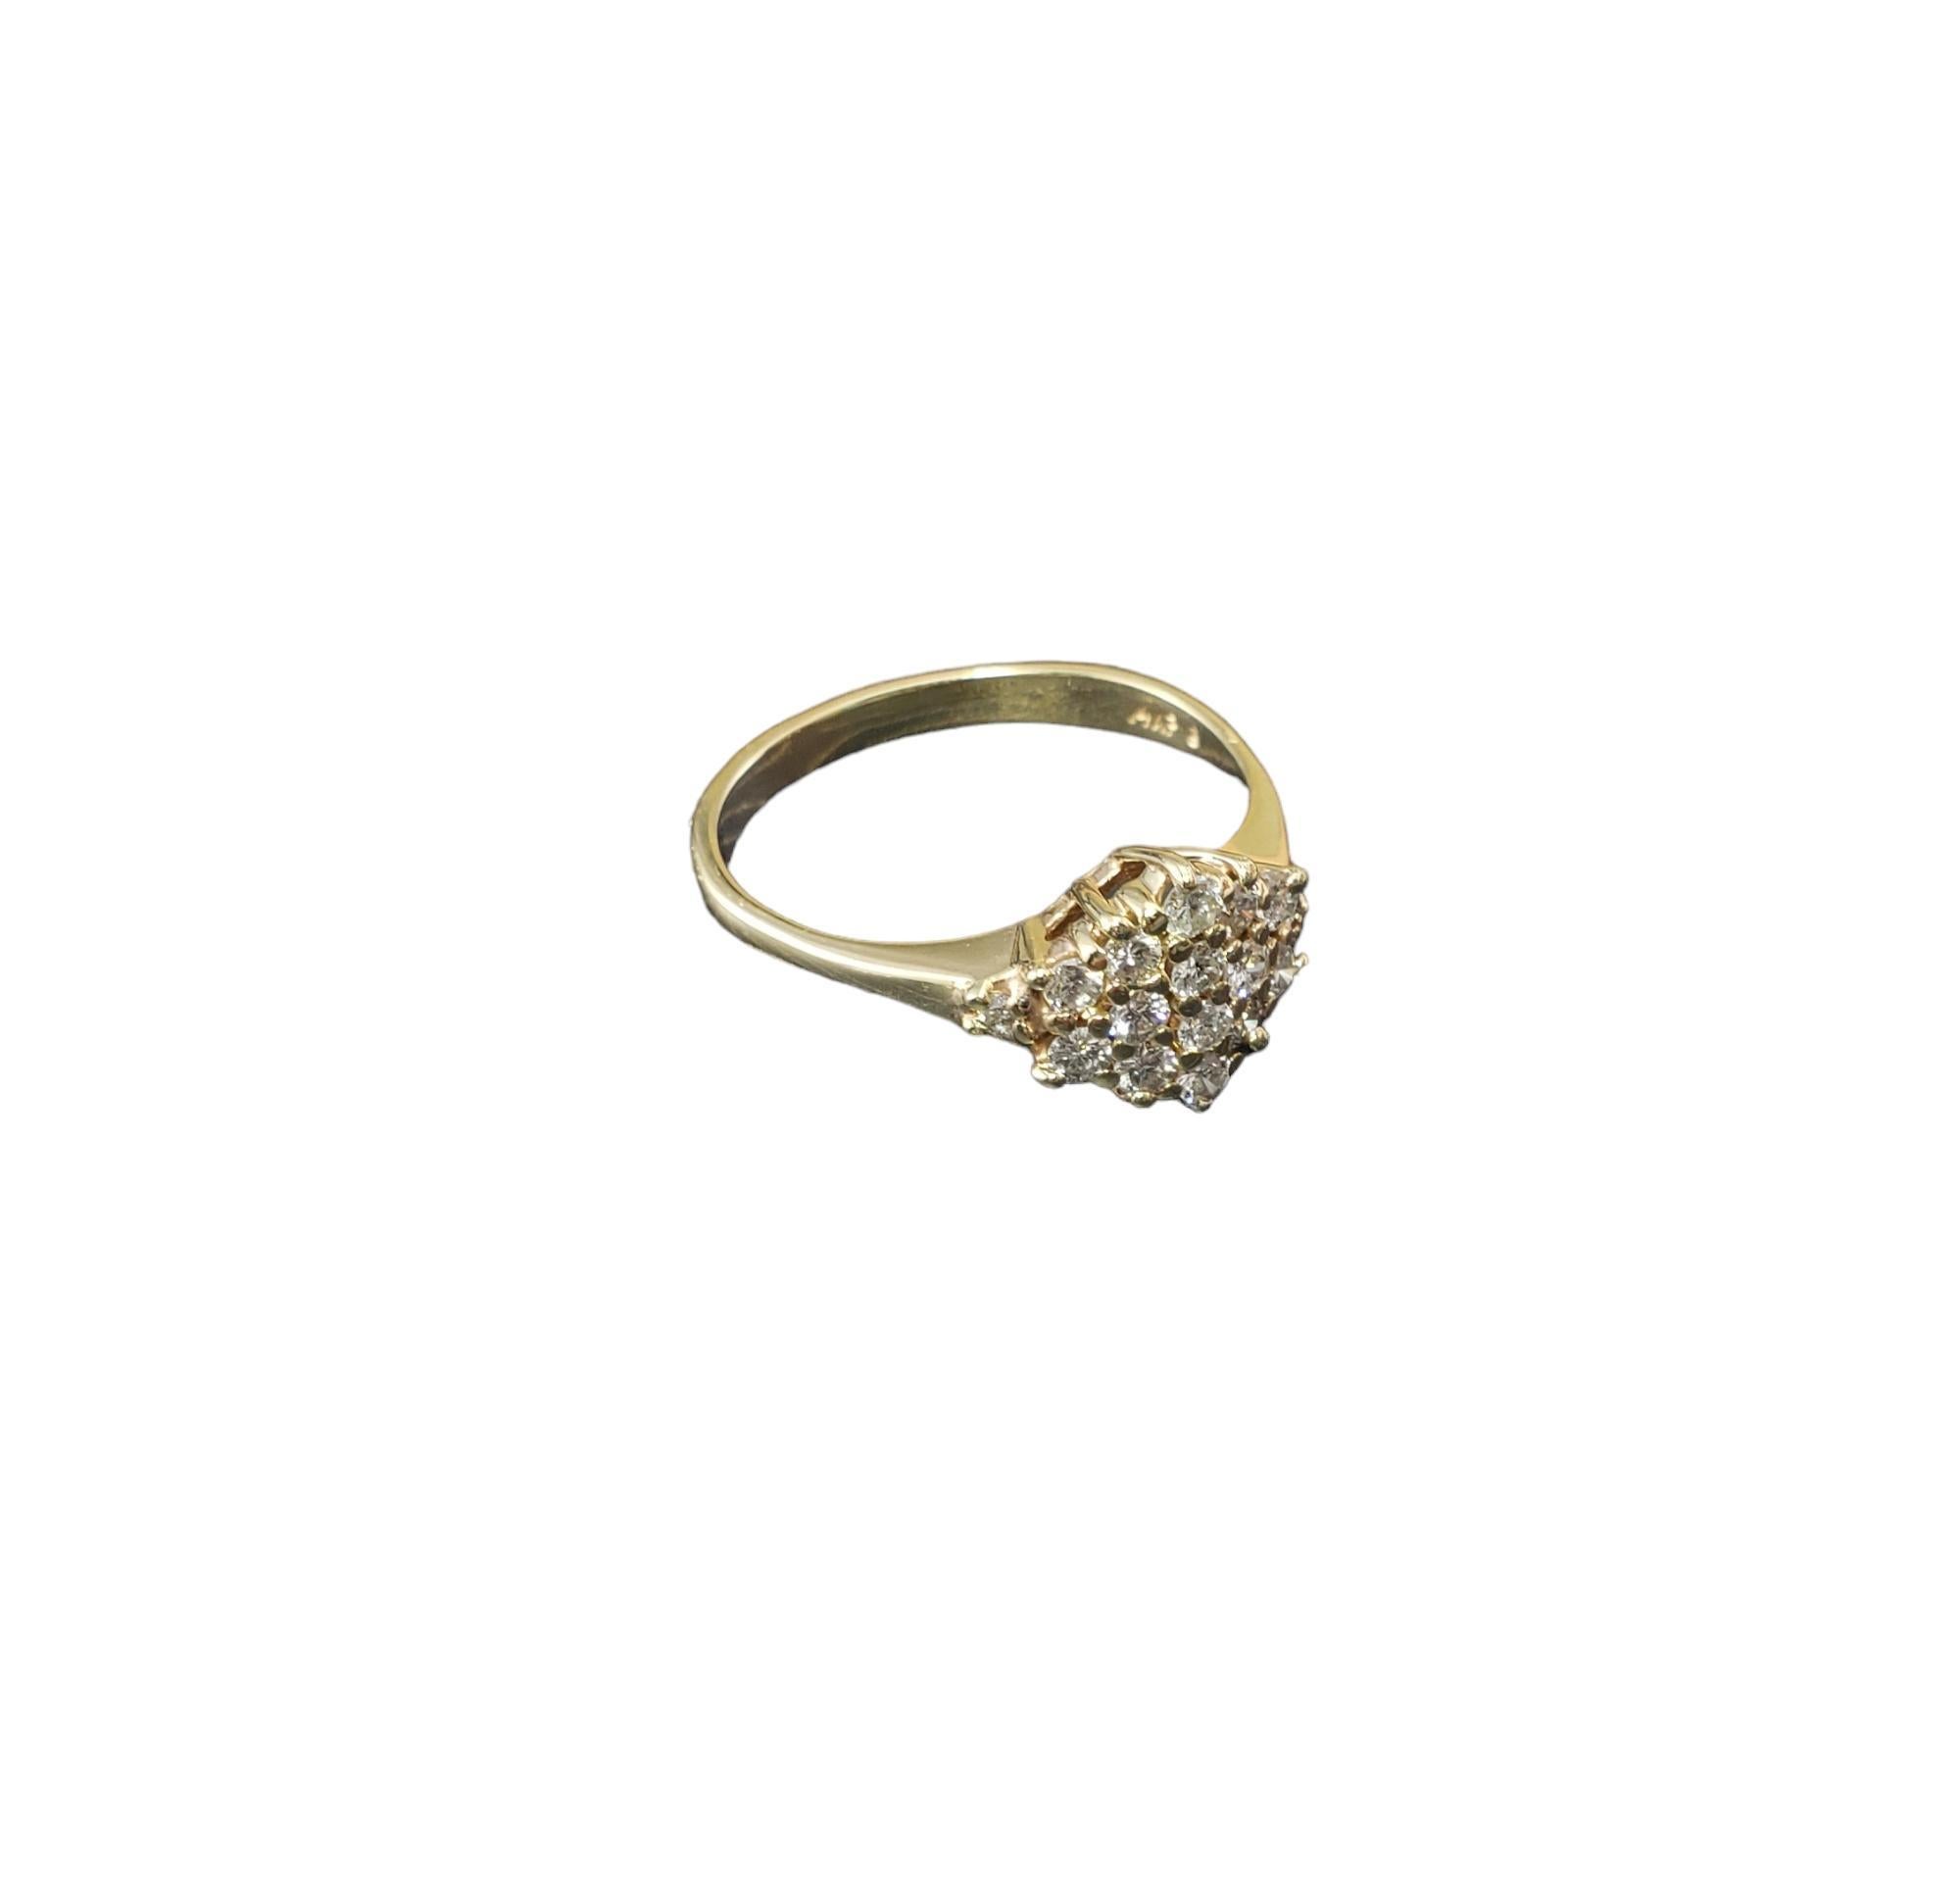 14 Karat Yellow Gold and Diamond Ring Size 7.5 #16351 In Good Condition For Sale In Washington Depot, CT